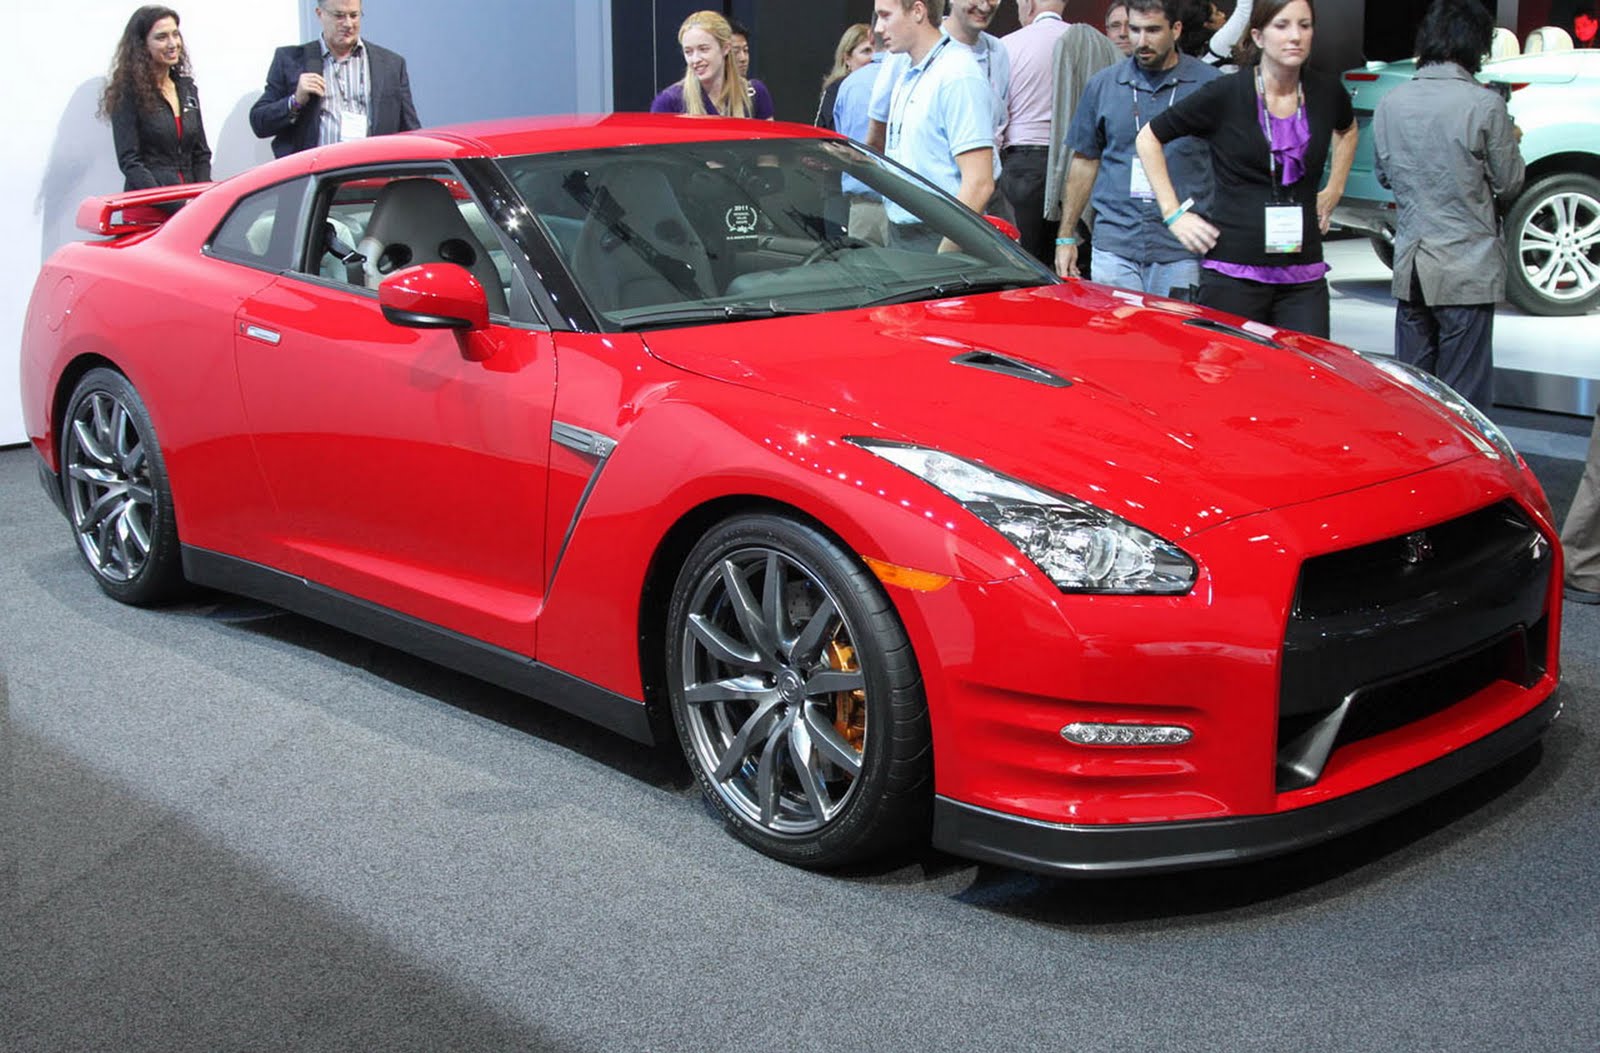 ... nissan gt r specifications 2012 nissan gt r features and 2012 nissan